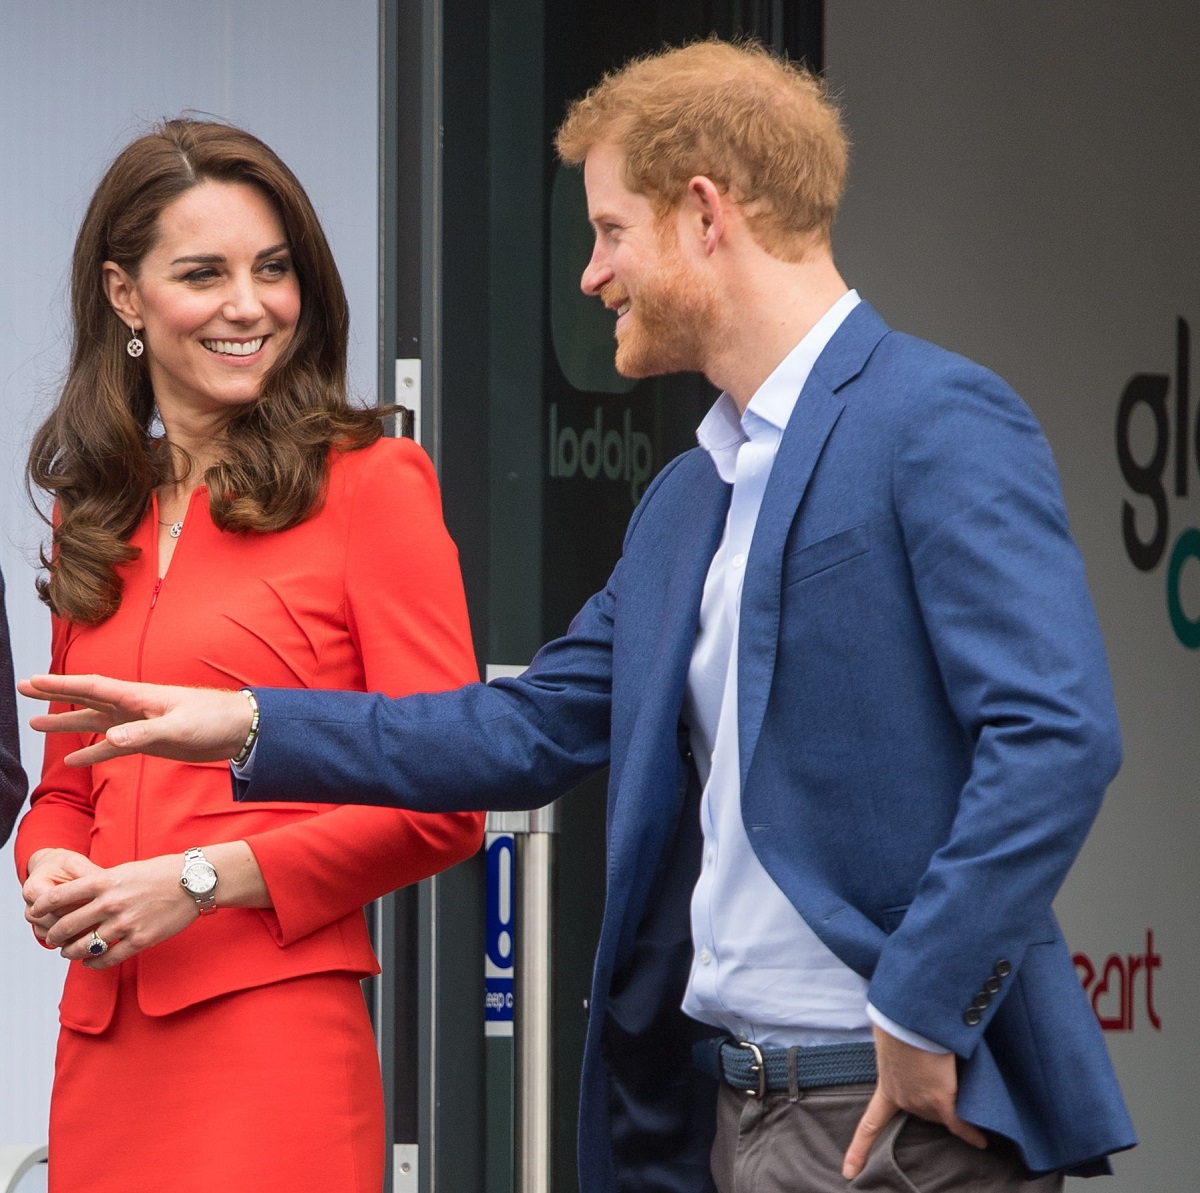 Meghan Markle and Prince Harry attend the official opening of The Global Academy